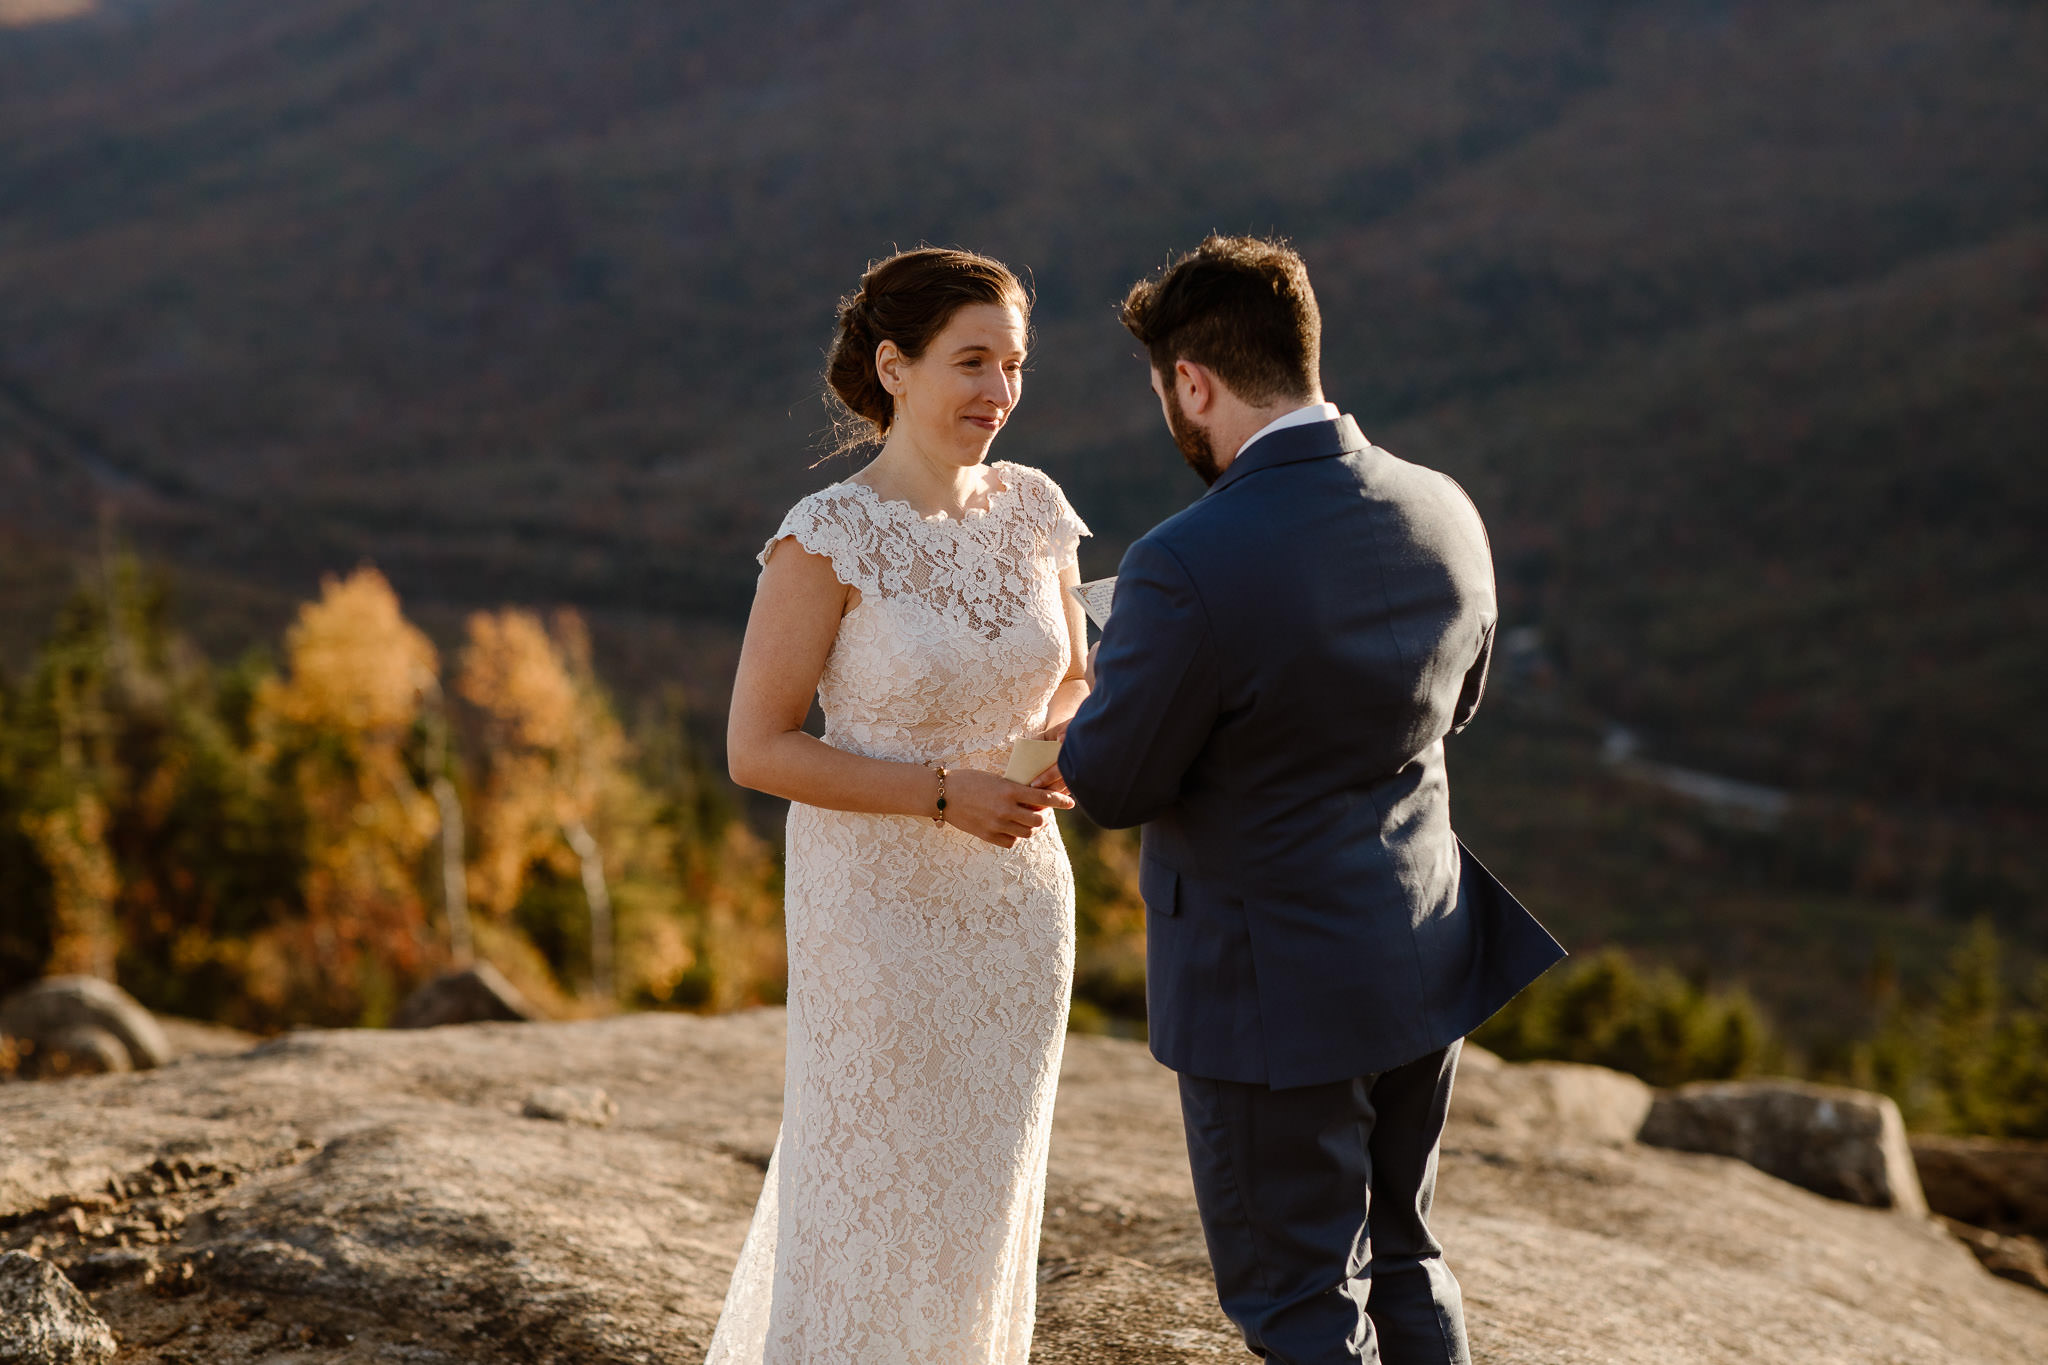 How to write your ceremony vows at your elopement. These tips and step by step guide will help you create the most beautiful vows.